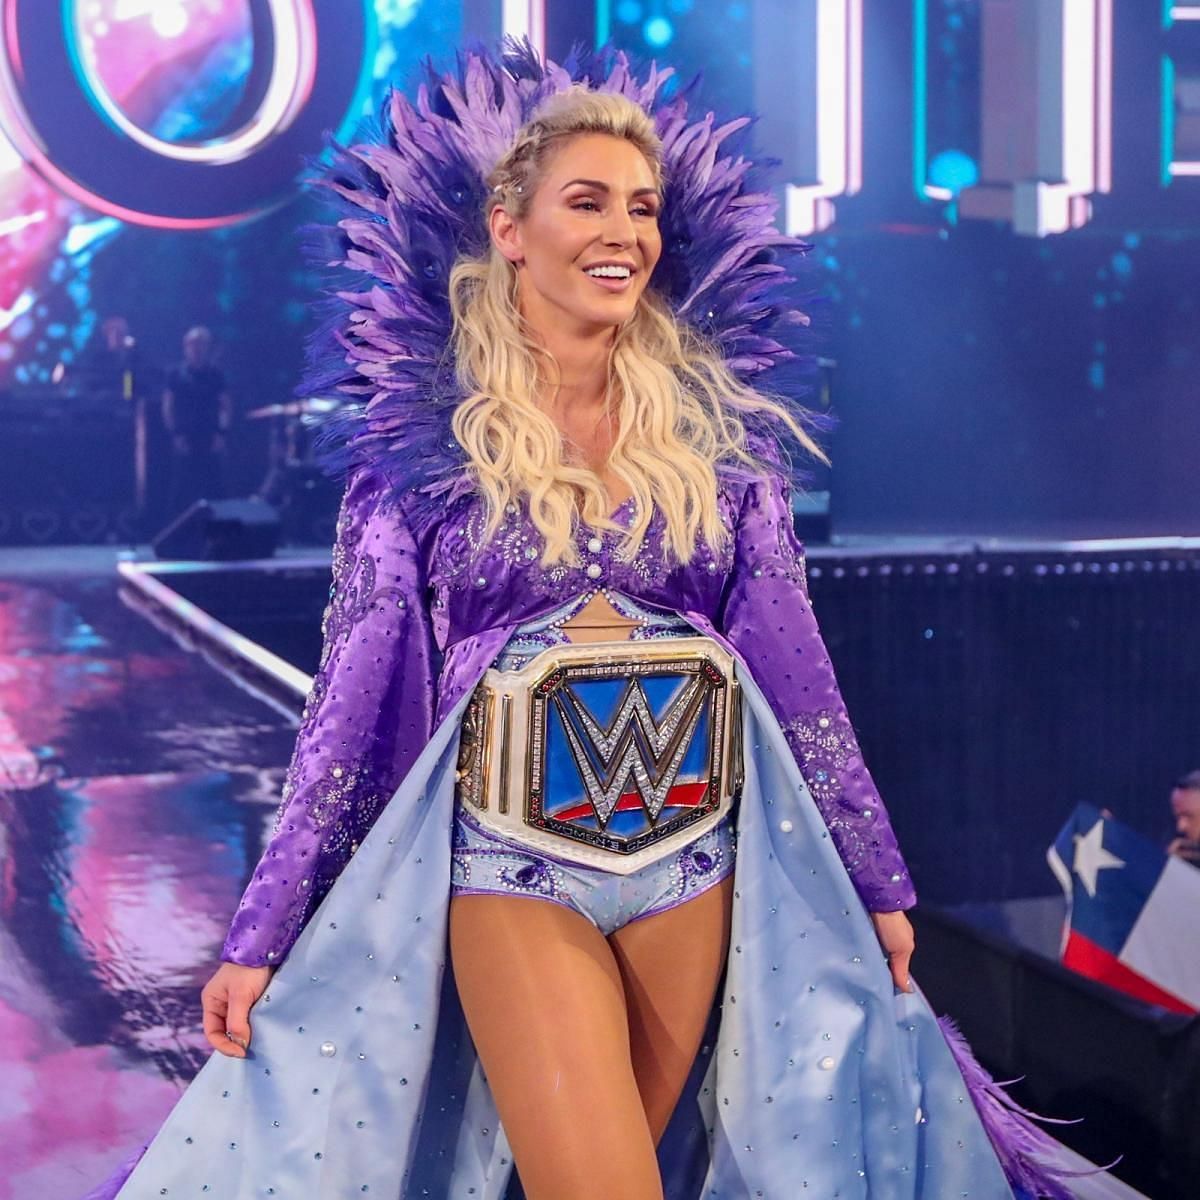 Who Will Win the Royal Rumble and Challenge Charlotte Flair at WrestleMania?